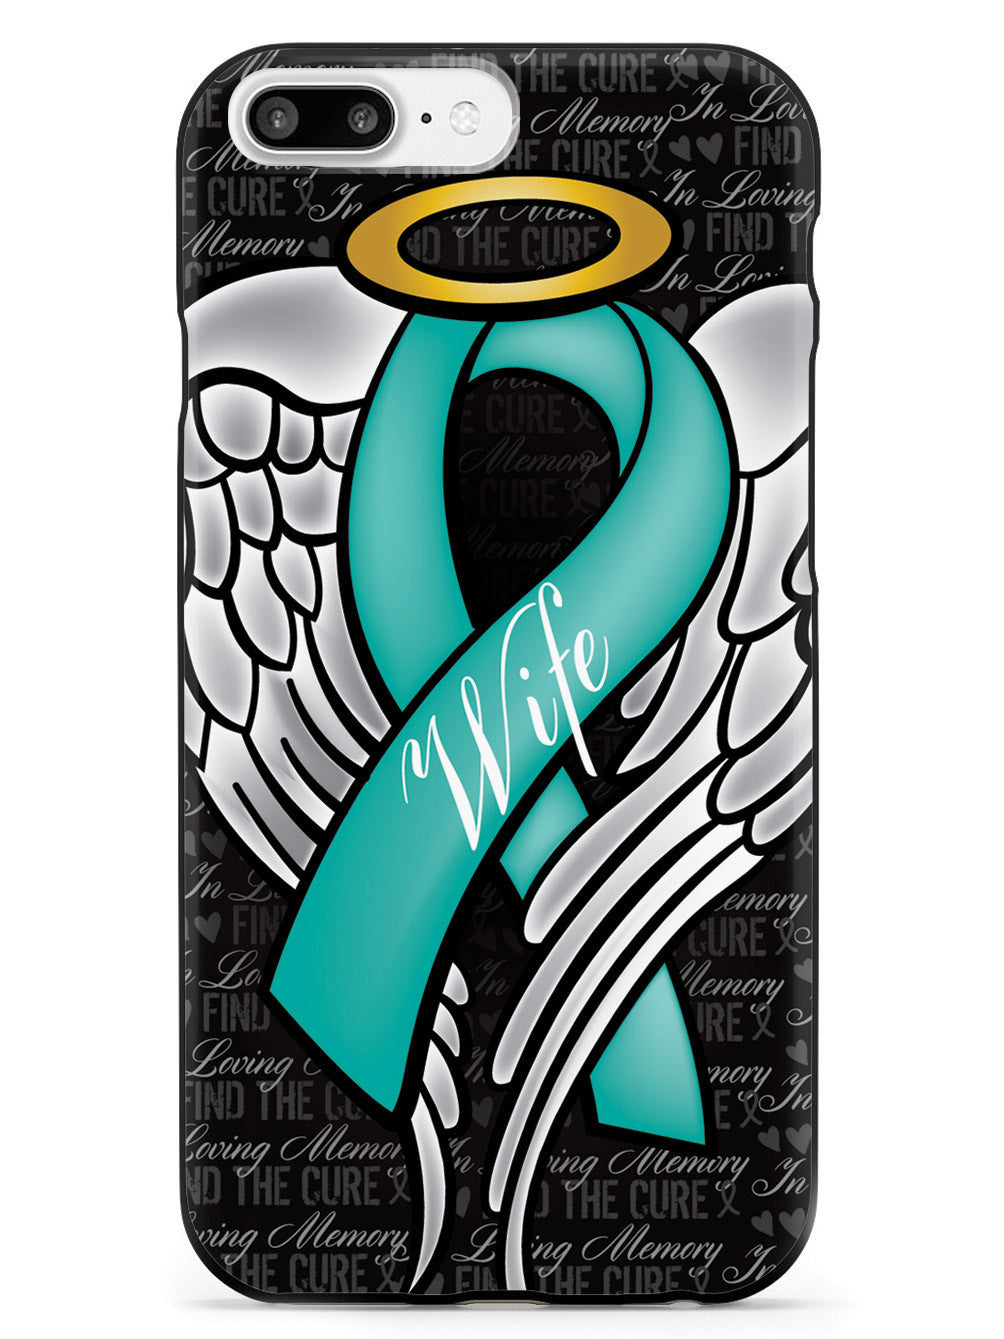 In Loving Memory of My Wife - Teal Ribbon Case